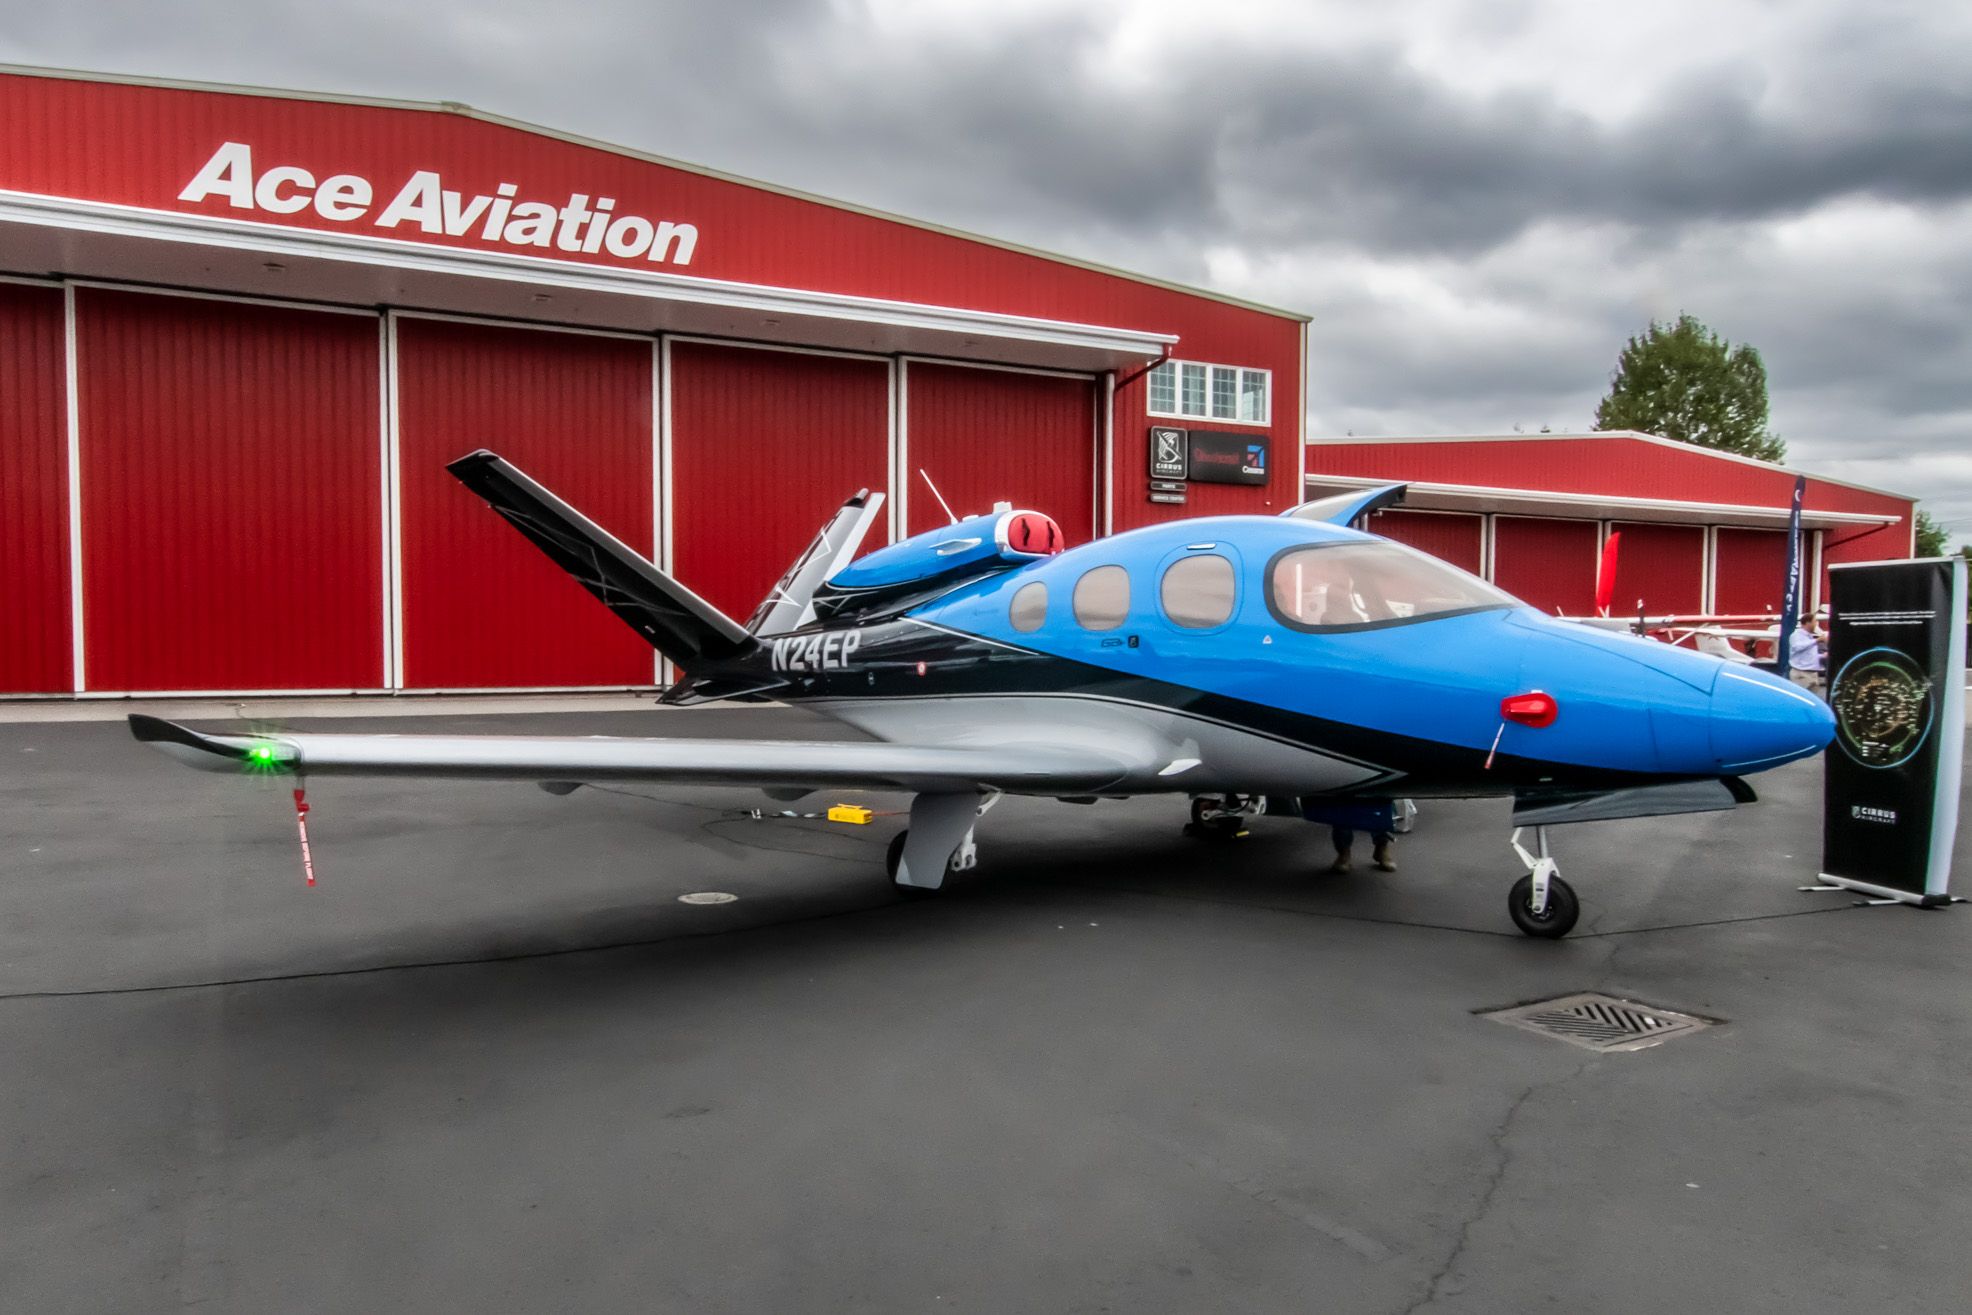 3x2 of Cirrus Vision Jet at Ace Aviation with overcast sky